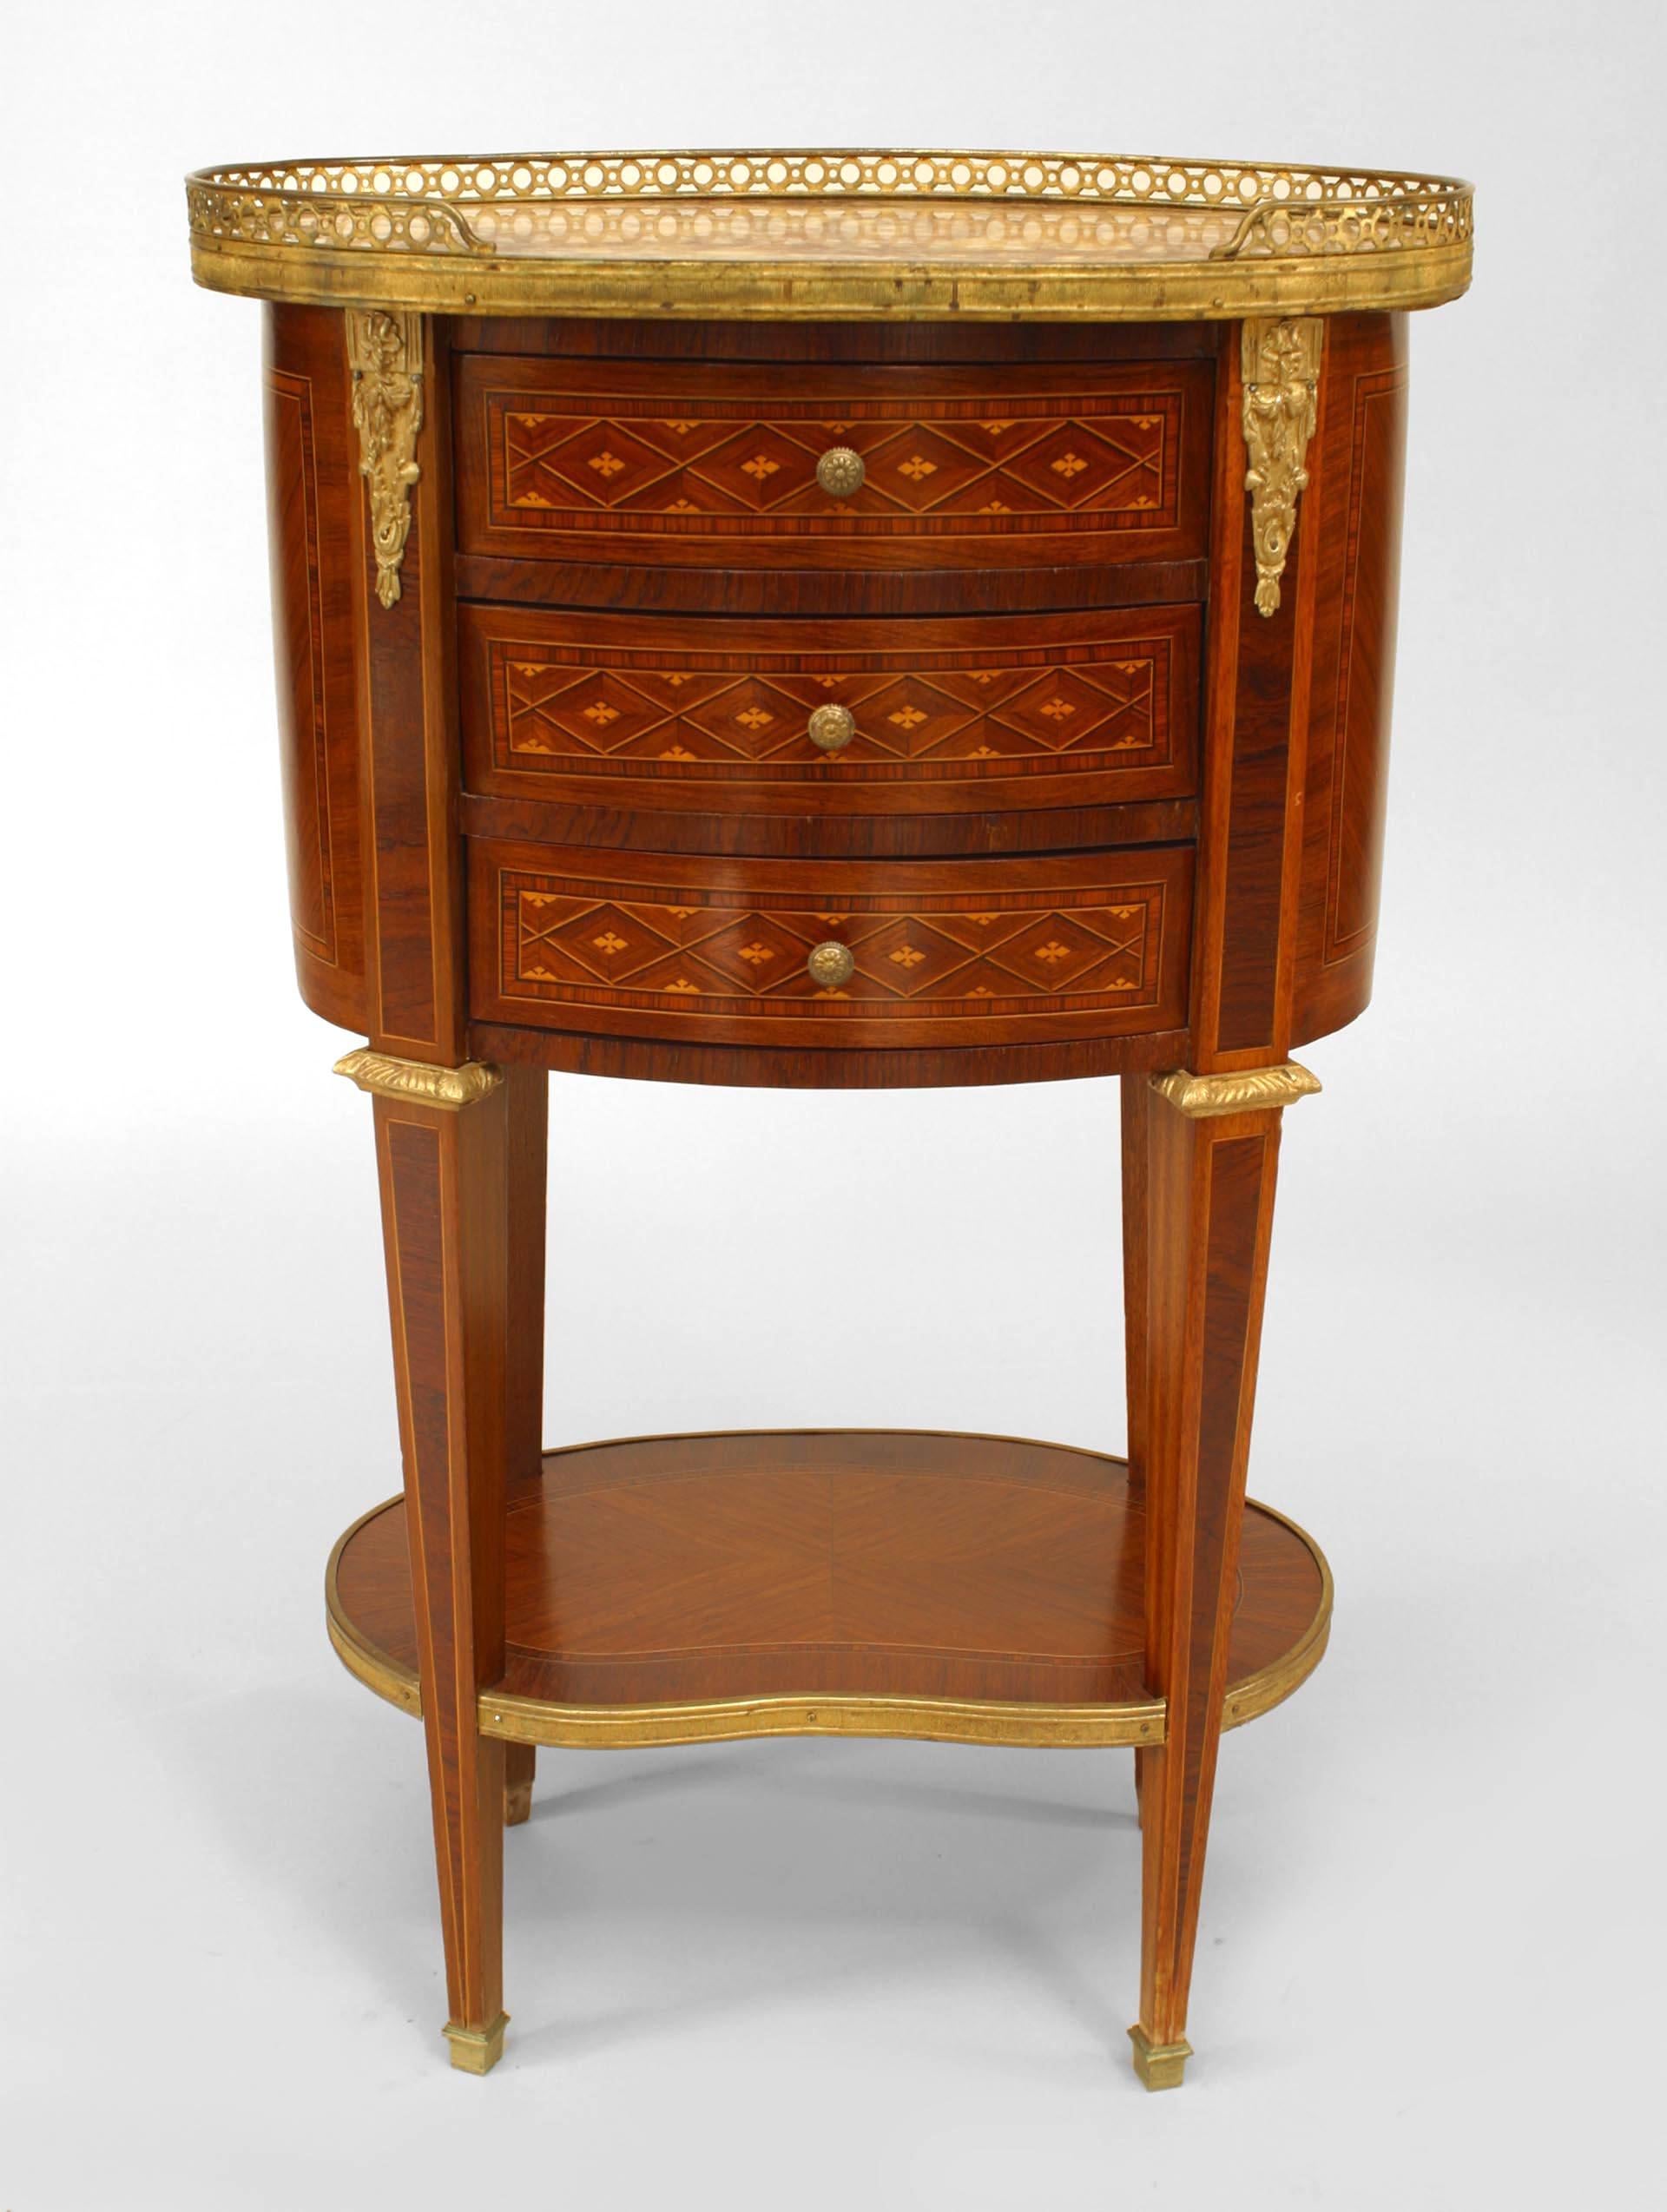 Pair of French Louis XVI-style (19th Century) oval form small bedside commodes (chevets) with parquetry inlaid design, three drawers, a bottom shelf, bronze trim and gallery, and marble top with gallery (PRICED AS Pair)
